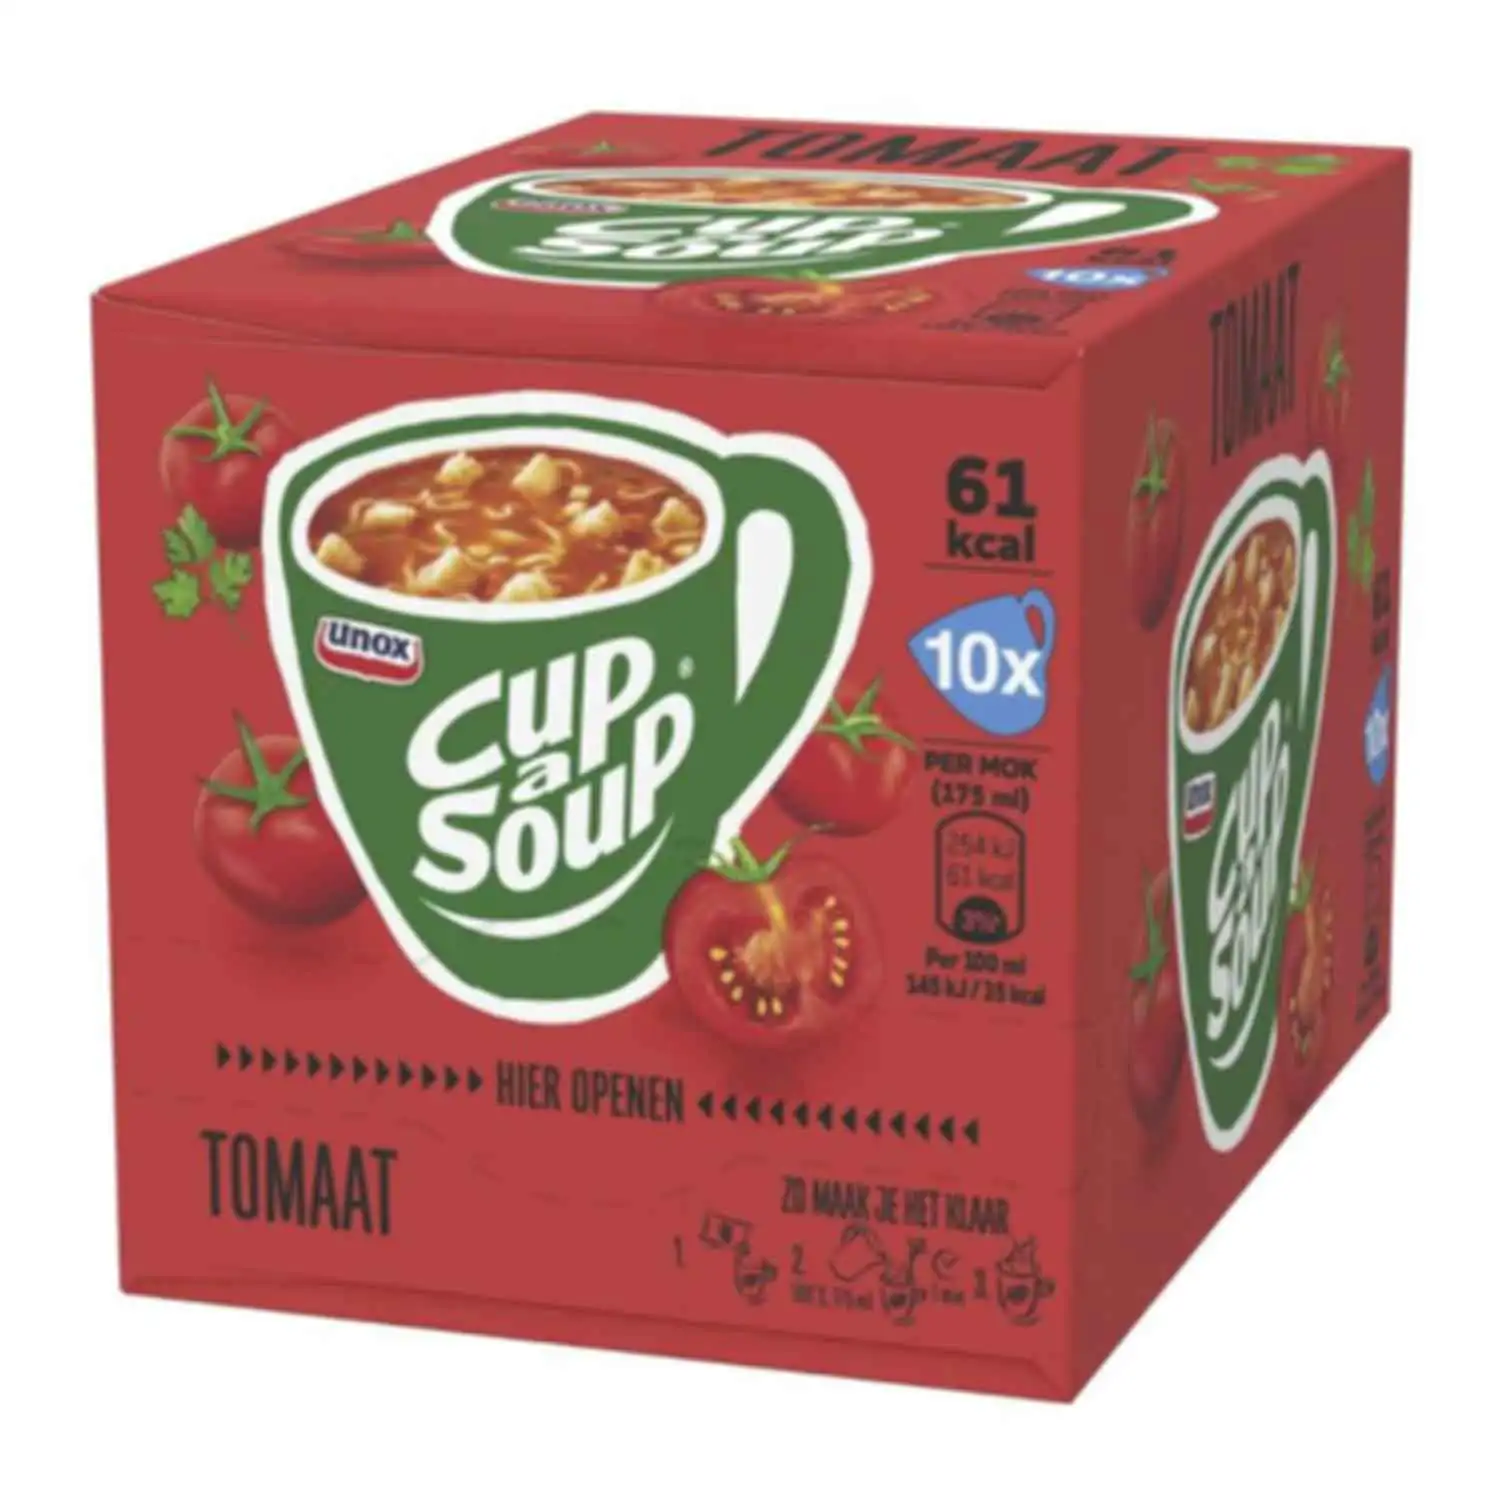 10x Cup a Soup tomate 18g - Buy at Real Tobacco